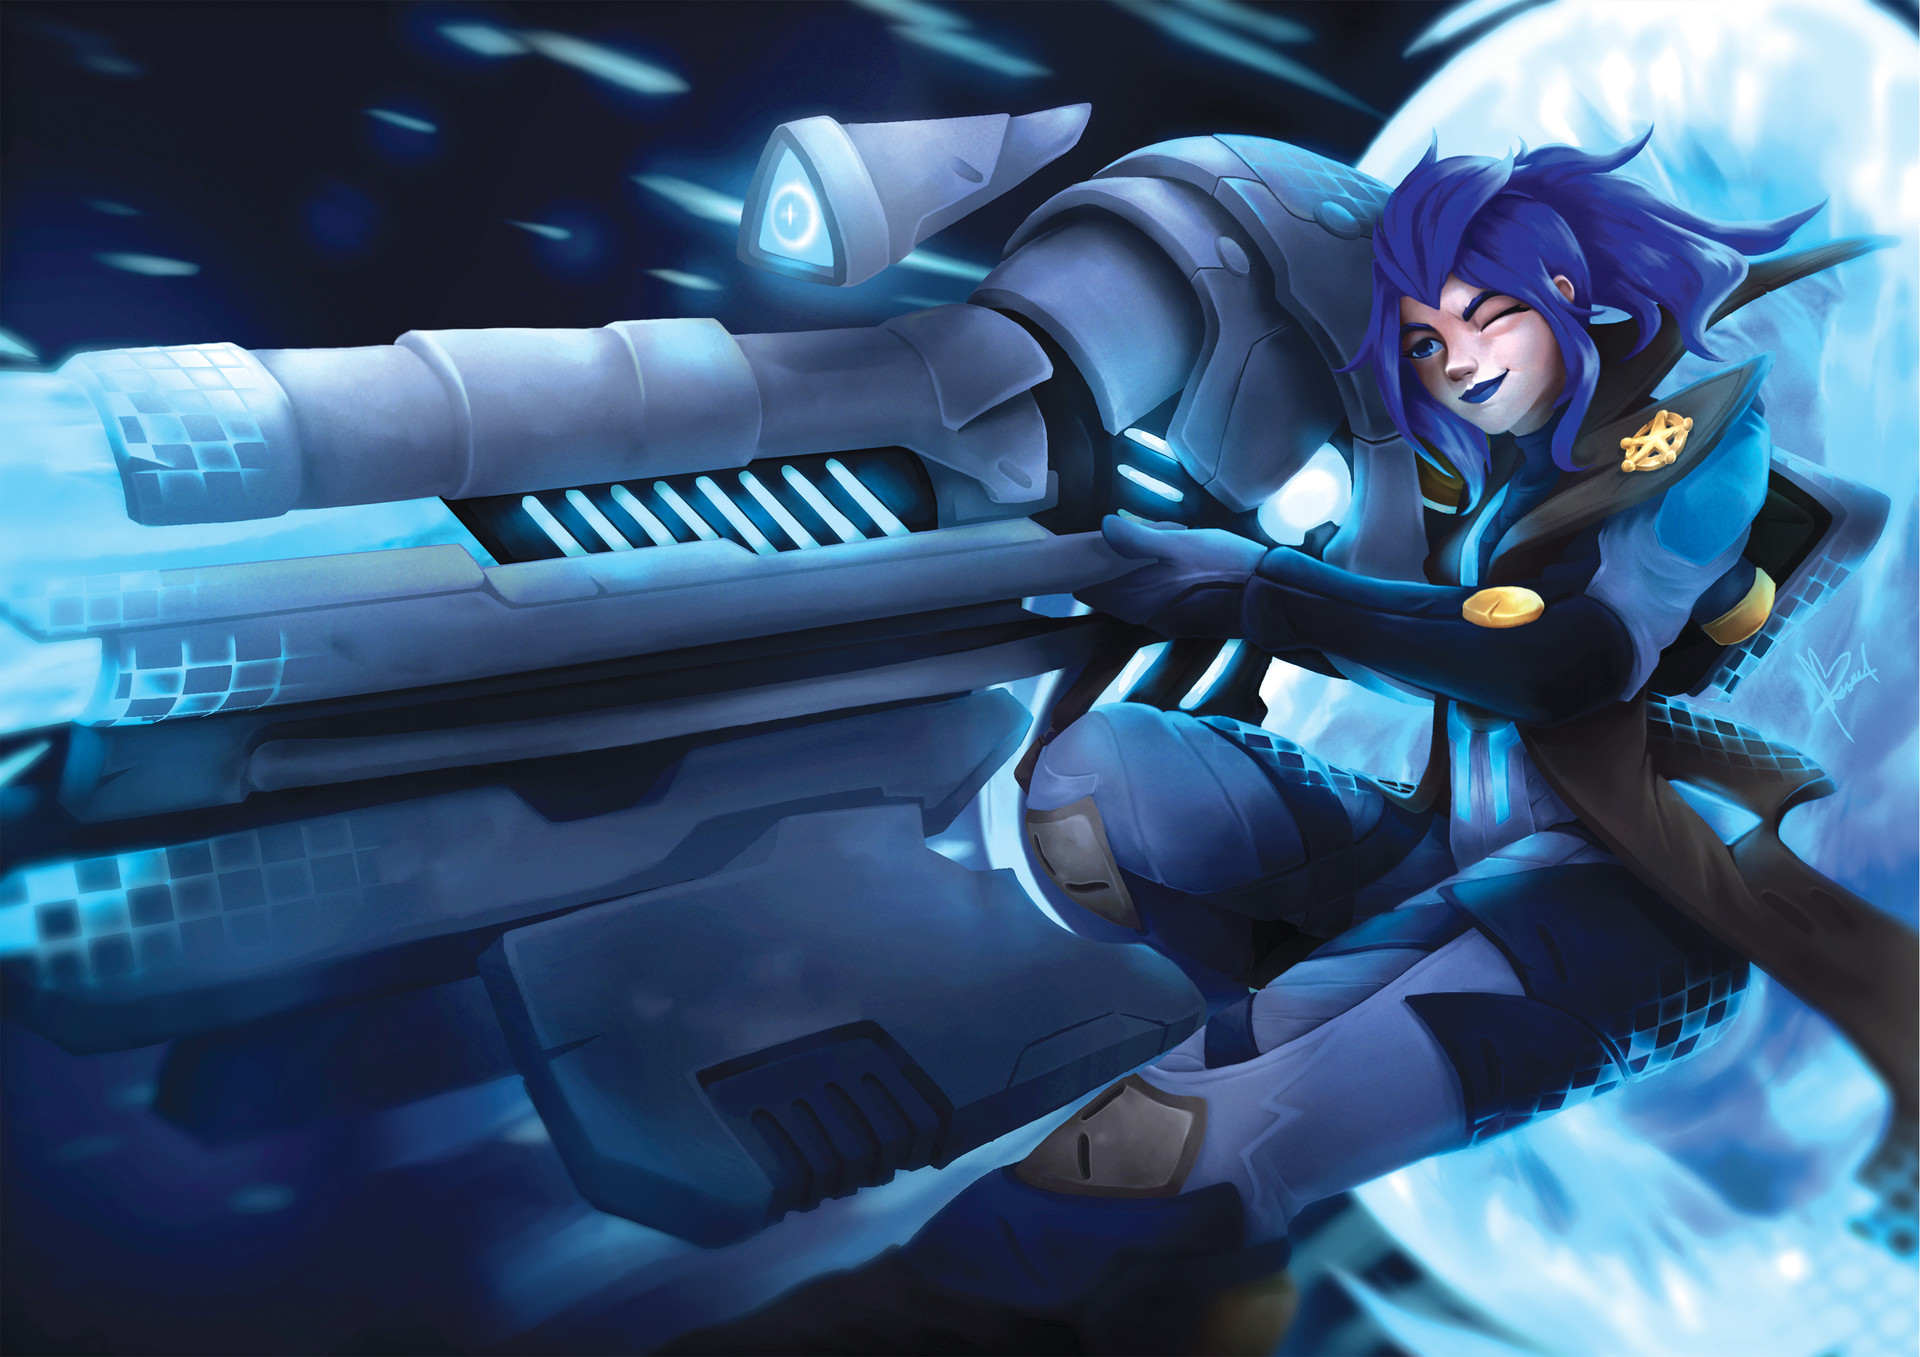 97 Caitlyn League Of Legends Wallpapers On Wallpapersafari Images, Photos, Reviews